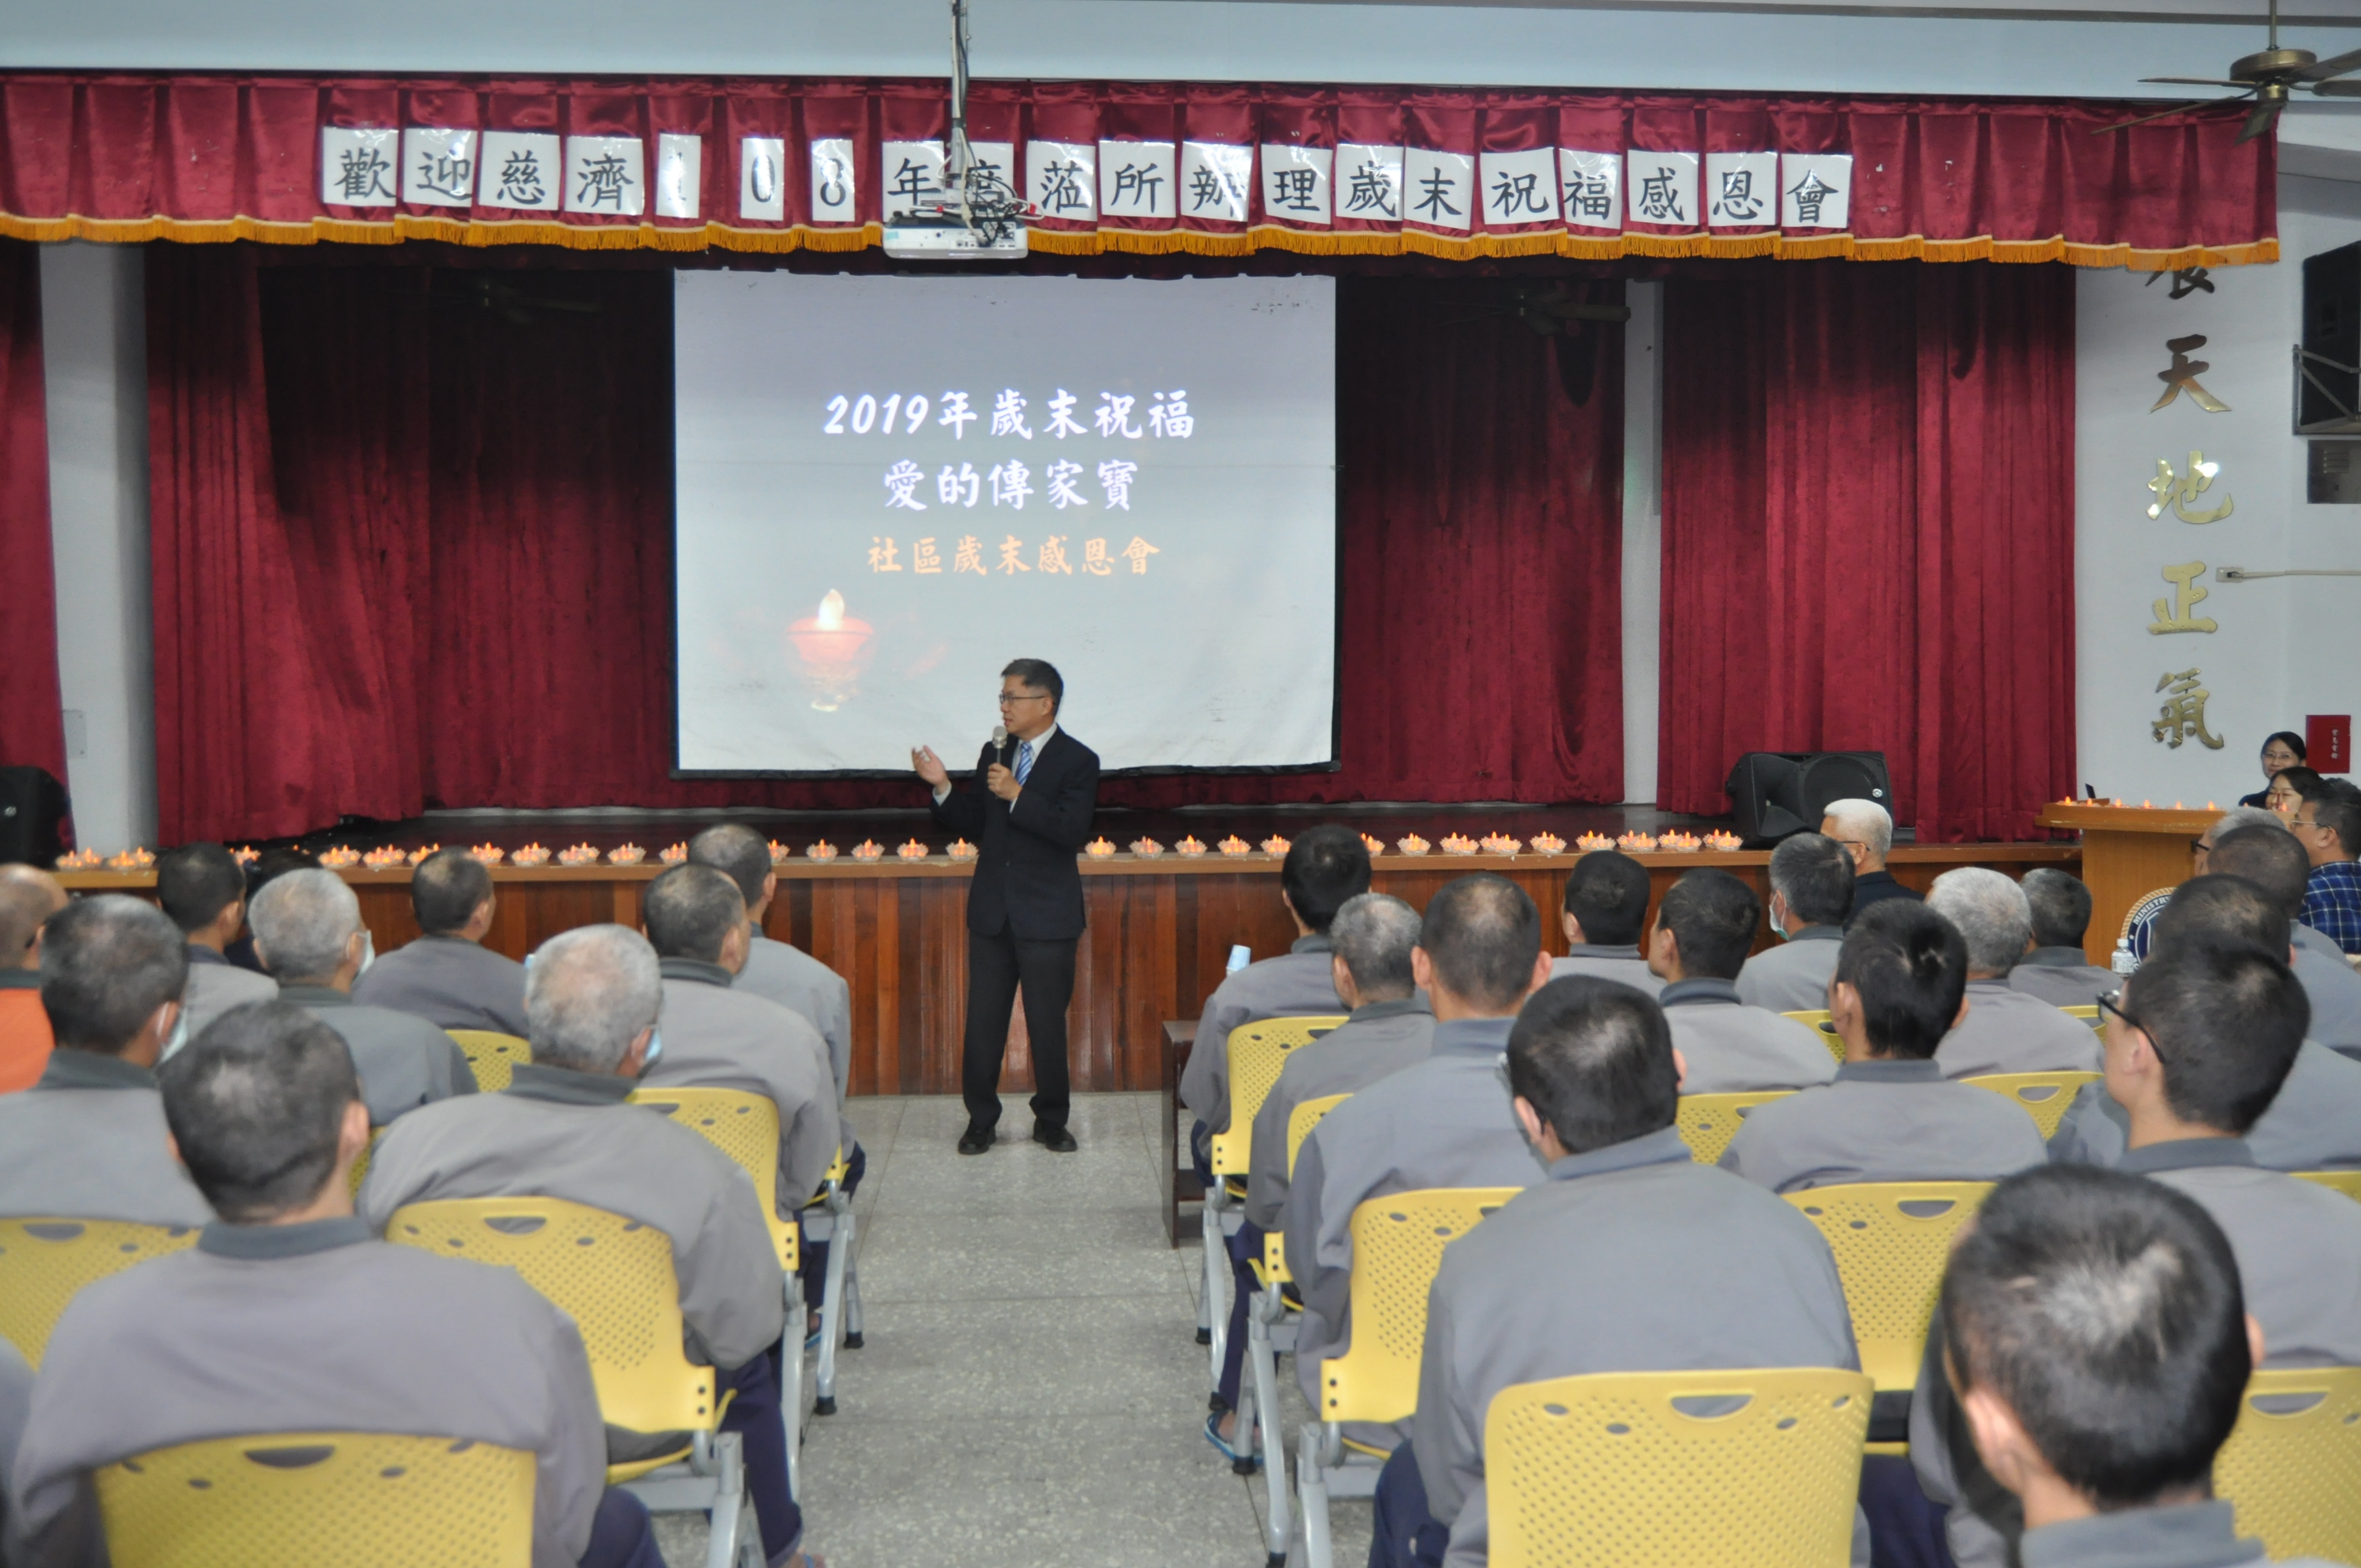 Chief of Taichung Detention Center,Agency of Corrections,Ministry of Justice opened the conference with a speech and blessed.